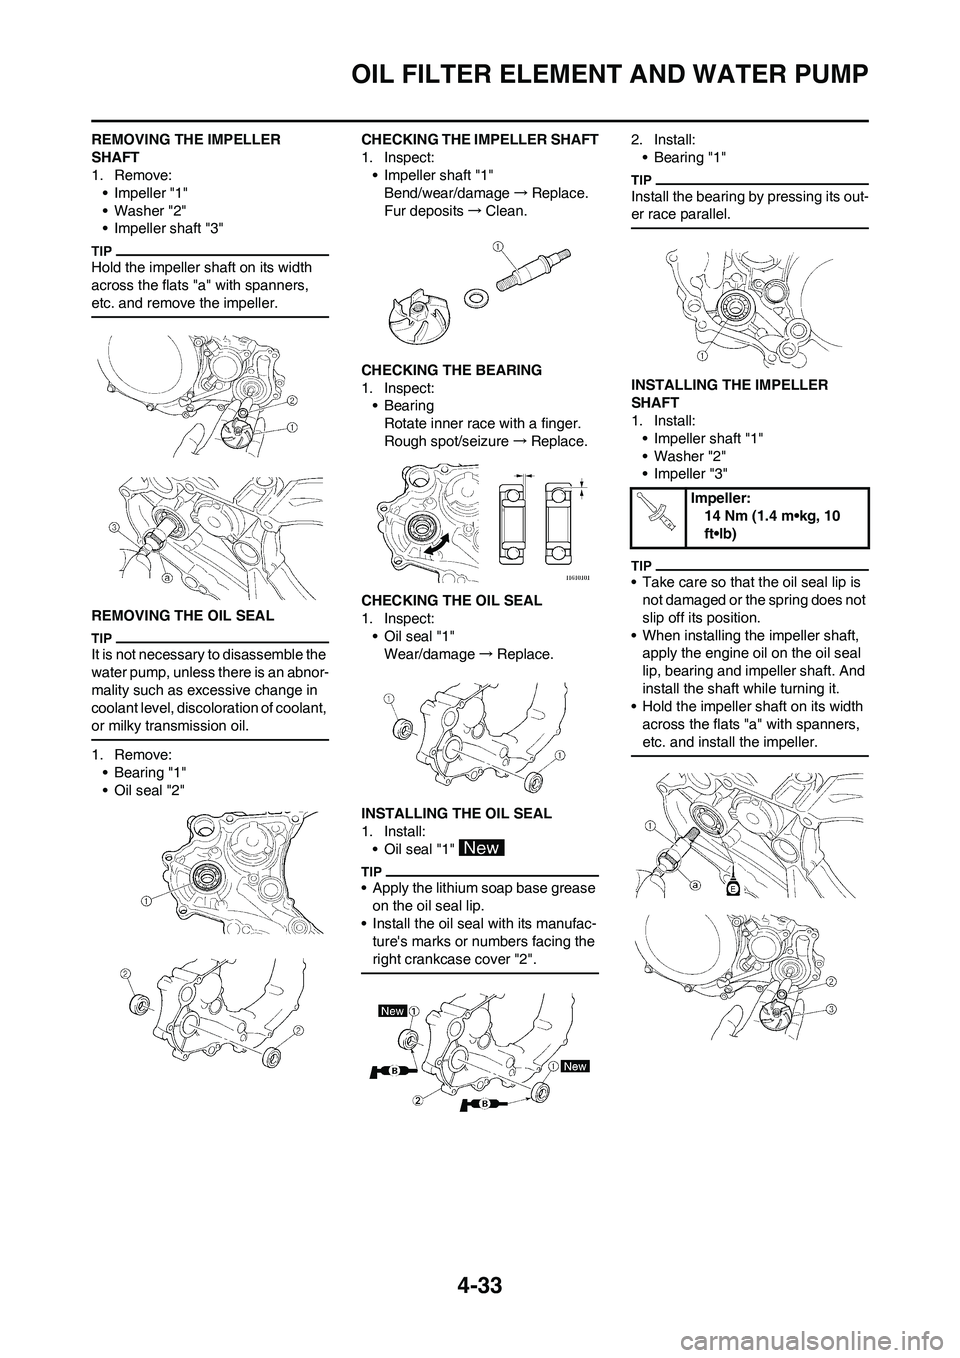 YAMAHA YZ450F 2010  Owners Manual 4-33
OIL FILTER ELEMENT AND WATER PUMP
REMOVING THE IMPELLER 
SHAFT
1. Remove:
• Impeller "1"
• Washer "2"
• Impeller shaft "3"
Hold the impeller shaft on its width 
across the flats "a" with sp